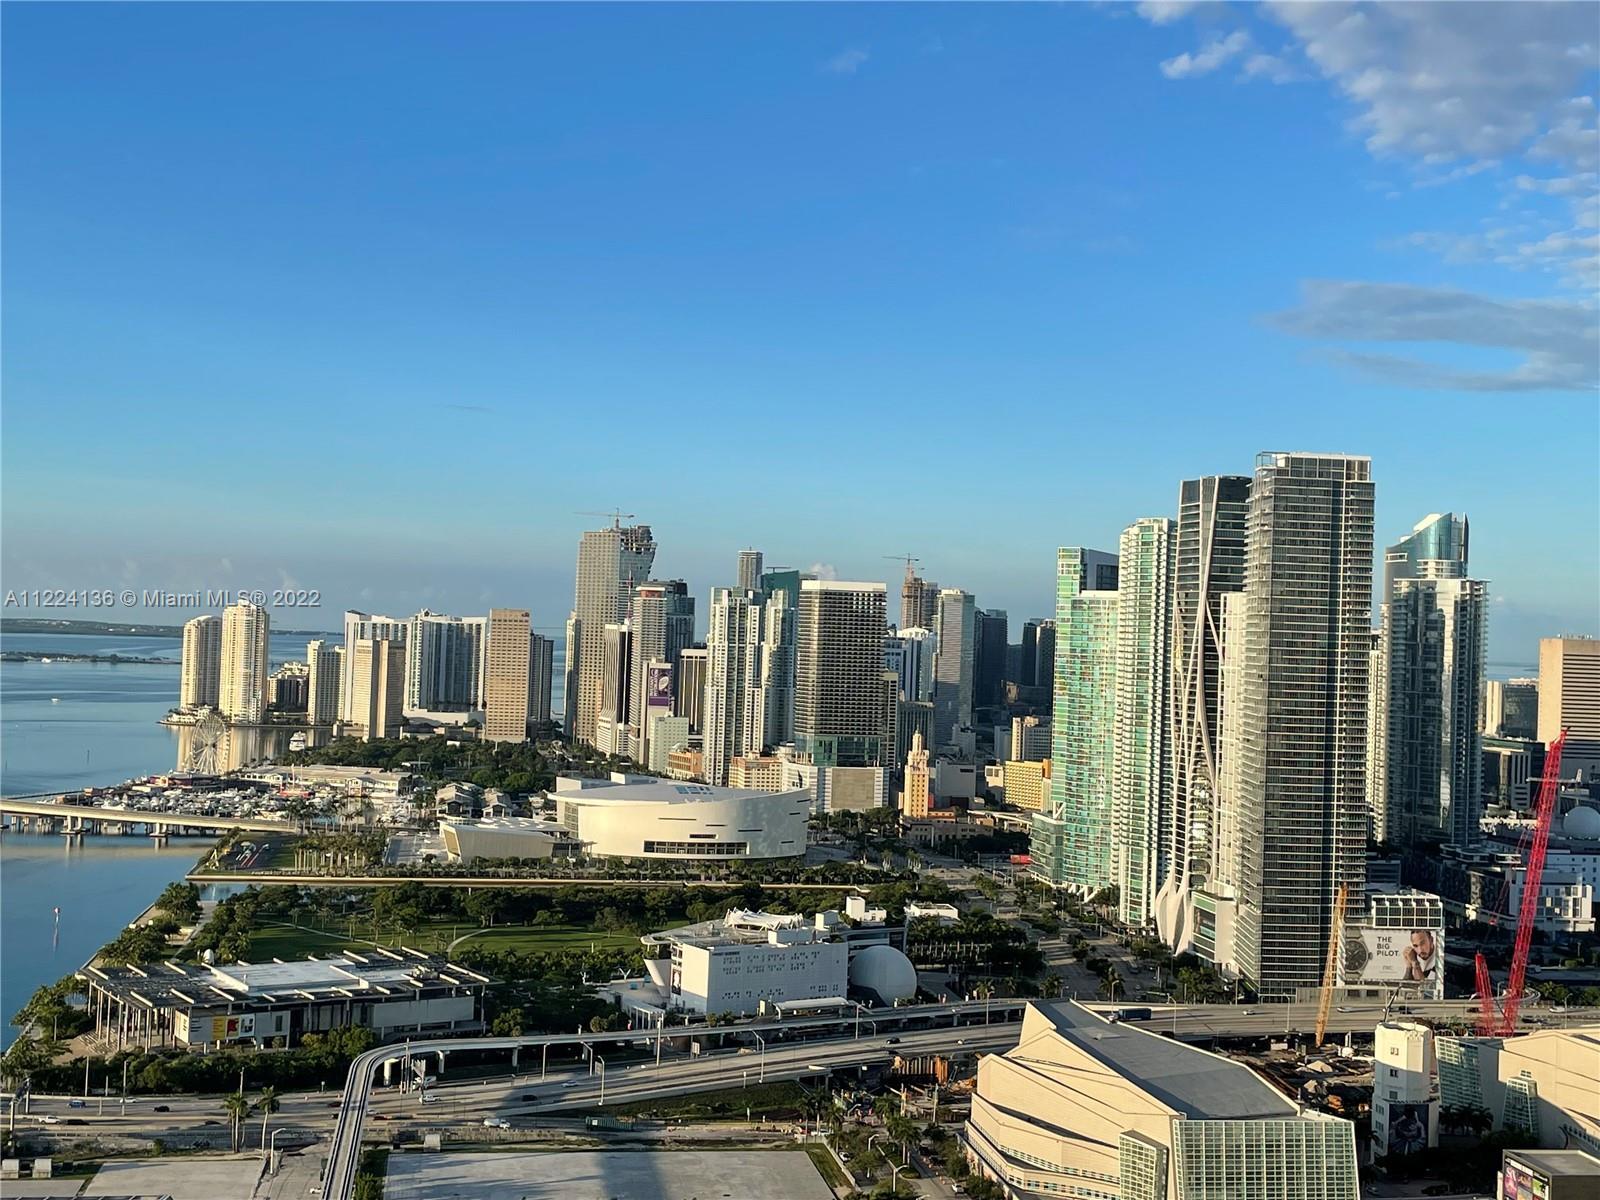 Someone said views? The most spectacular view Miami has to offer on the top of the 51st floor "skypa